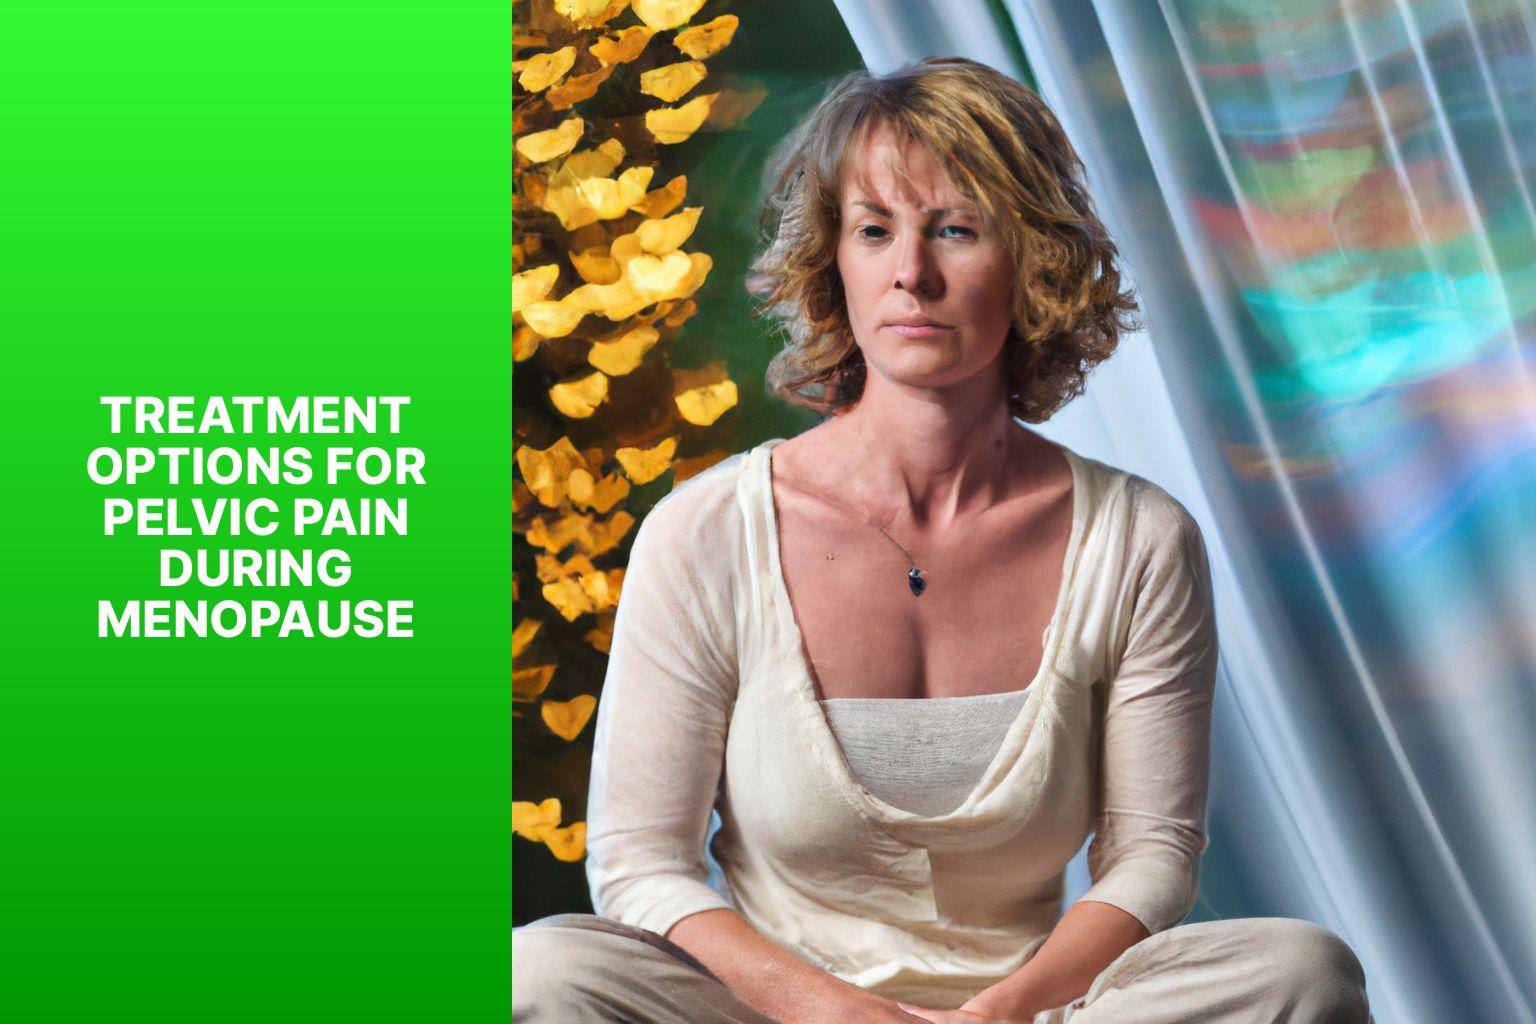 Treatment Options for Pelvic Pain during Menopause - Menopause and Pelvic Pain: What